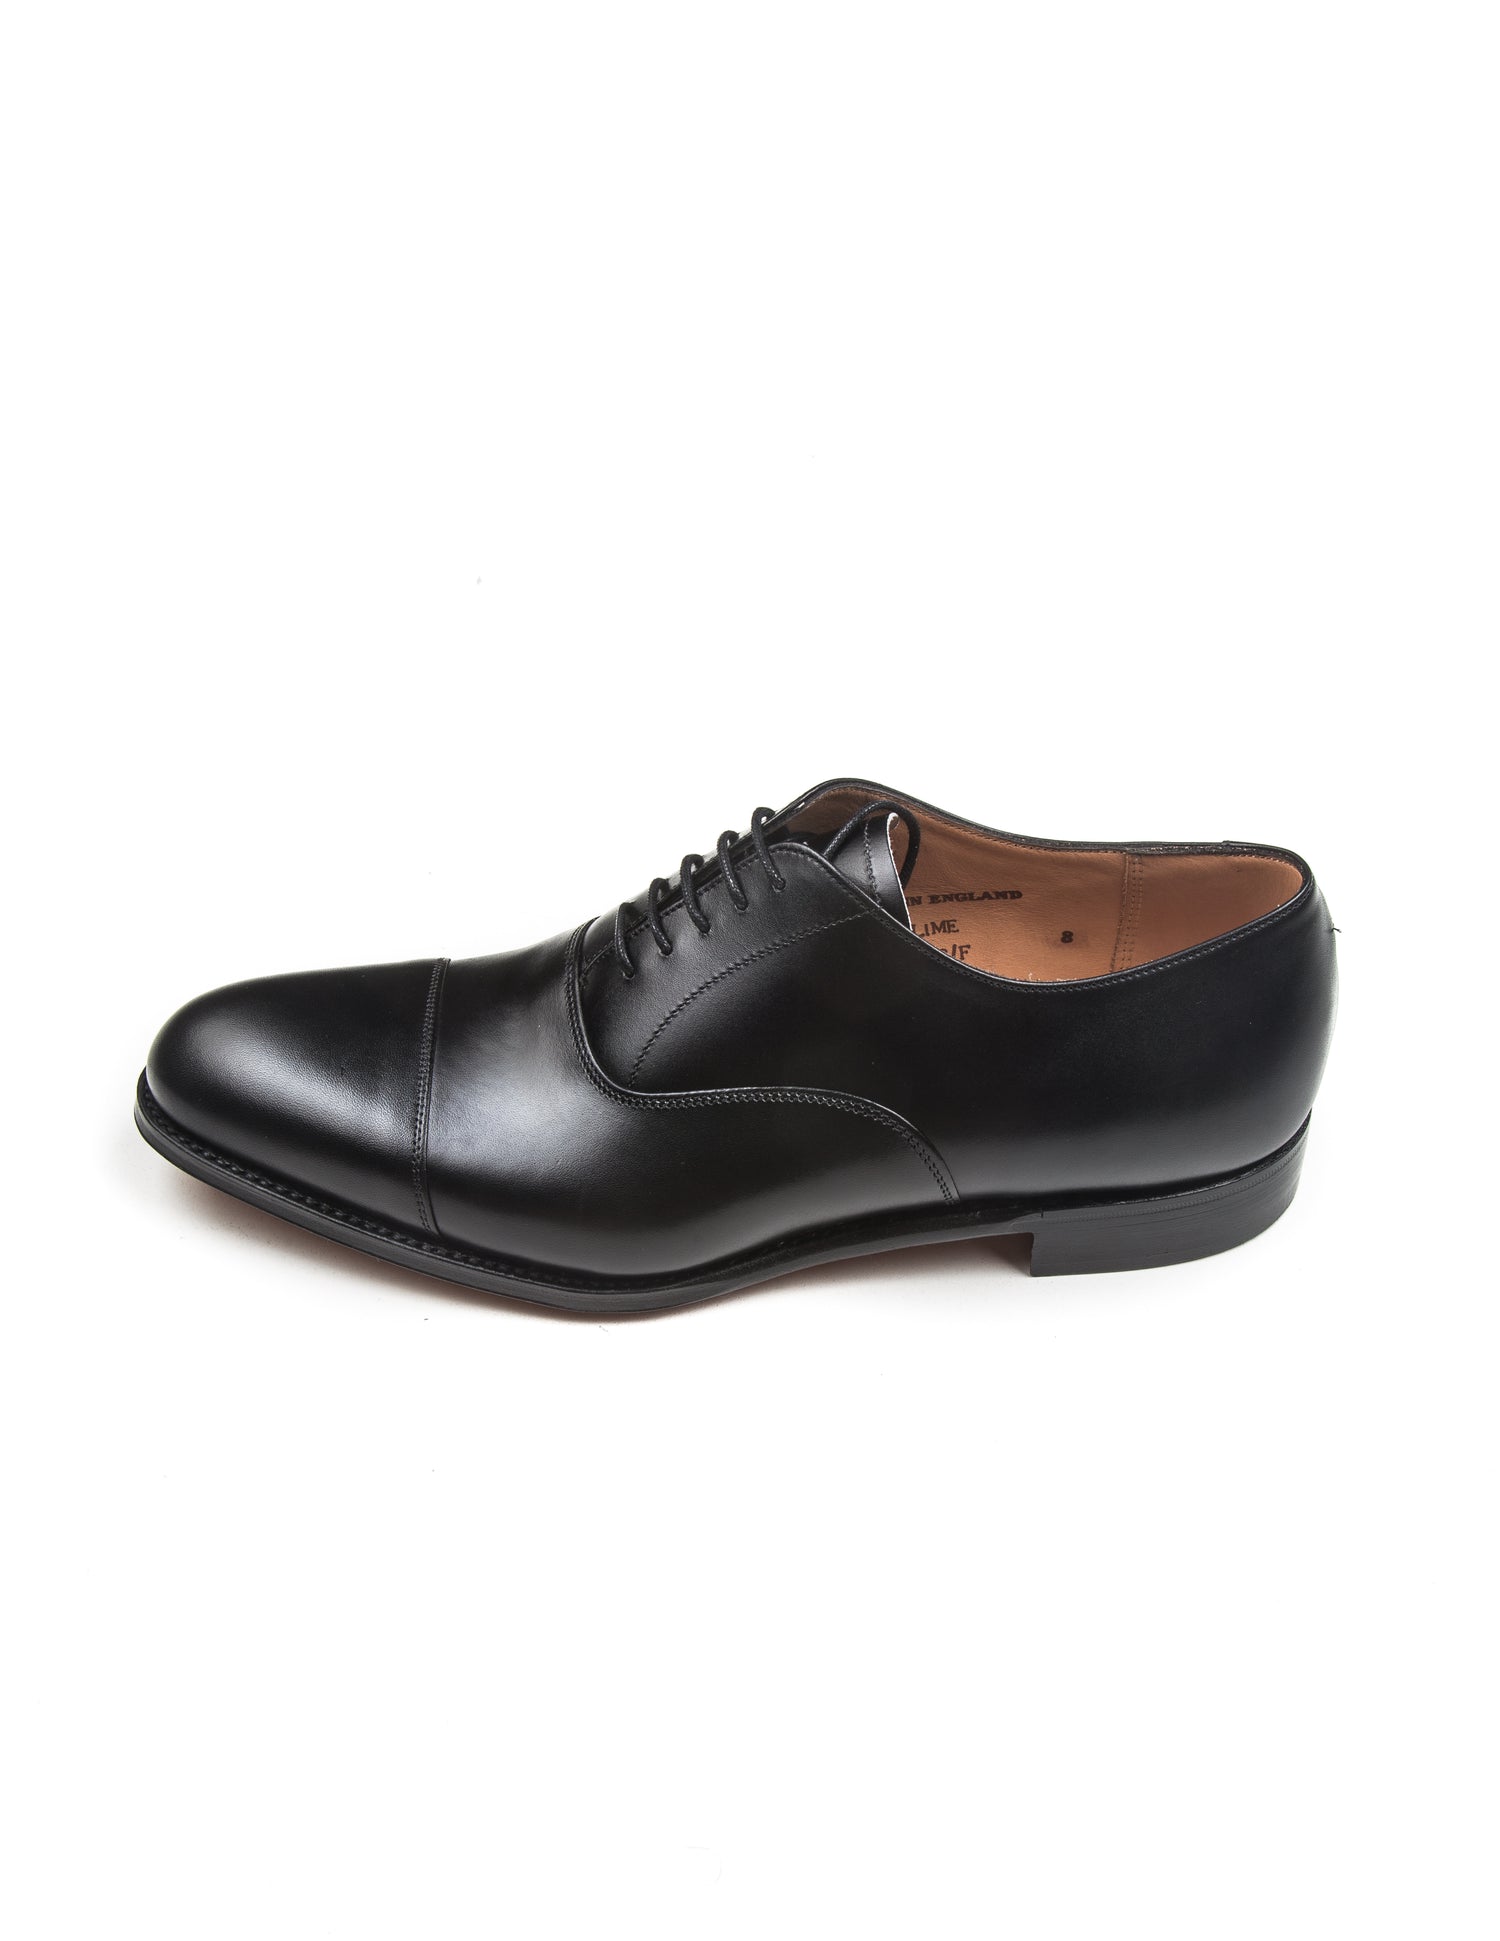 Side detail of Lime Oxford Shoes in Black Calf Leather